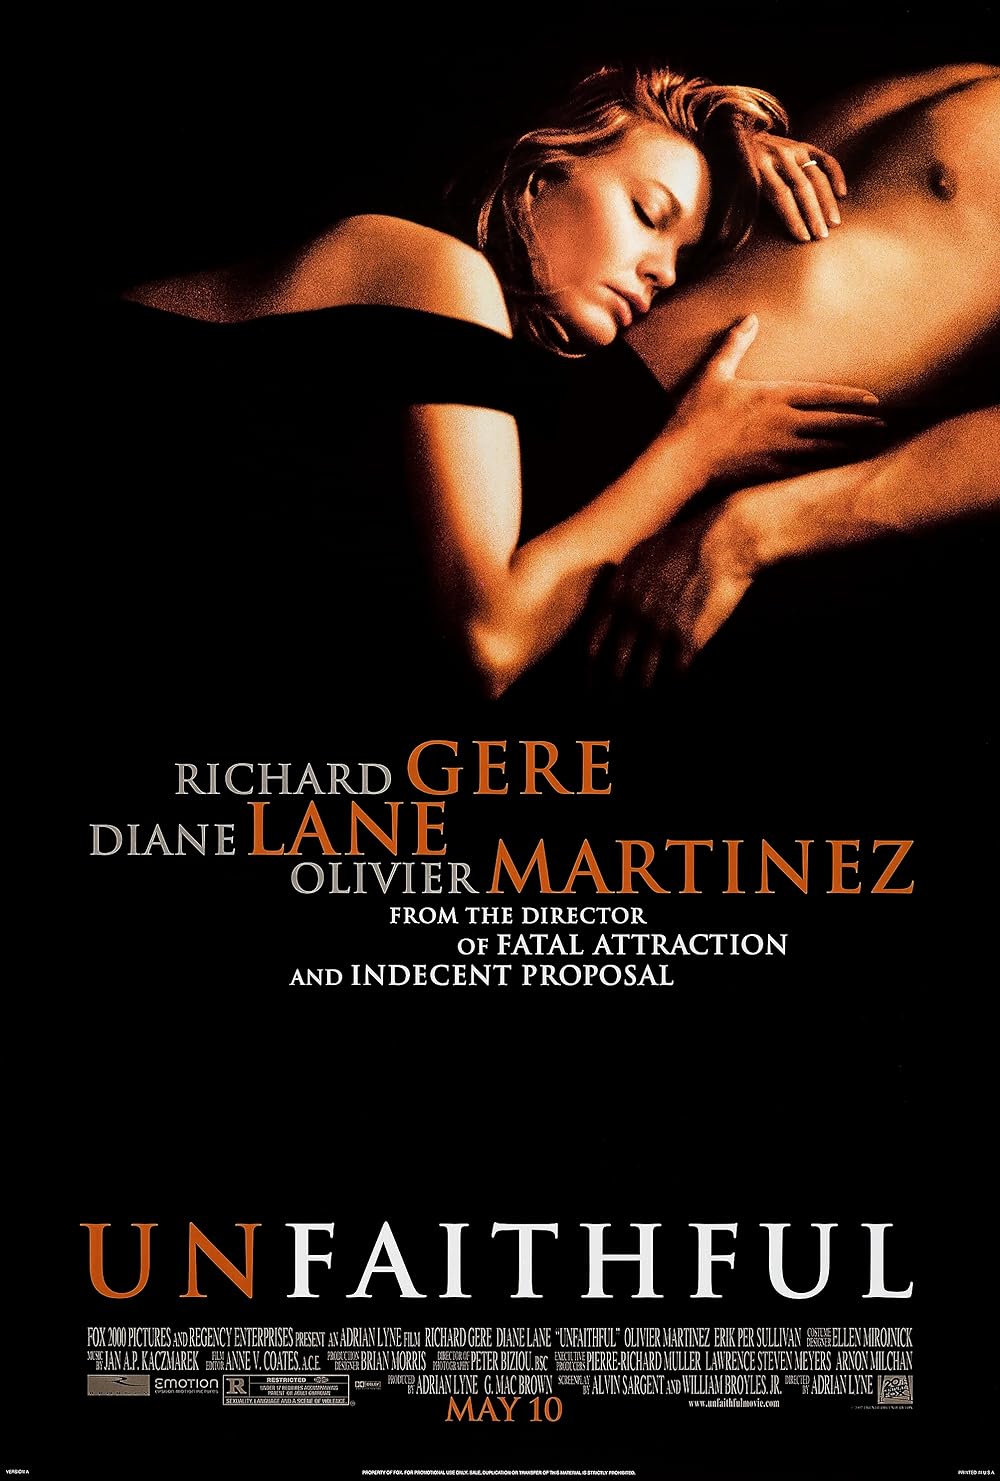 cody biehl recommends unfaithful full movie free pic